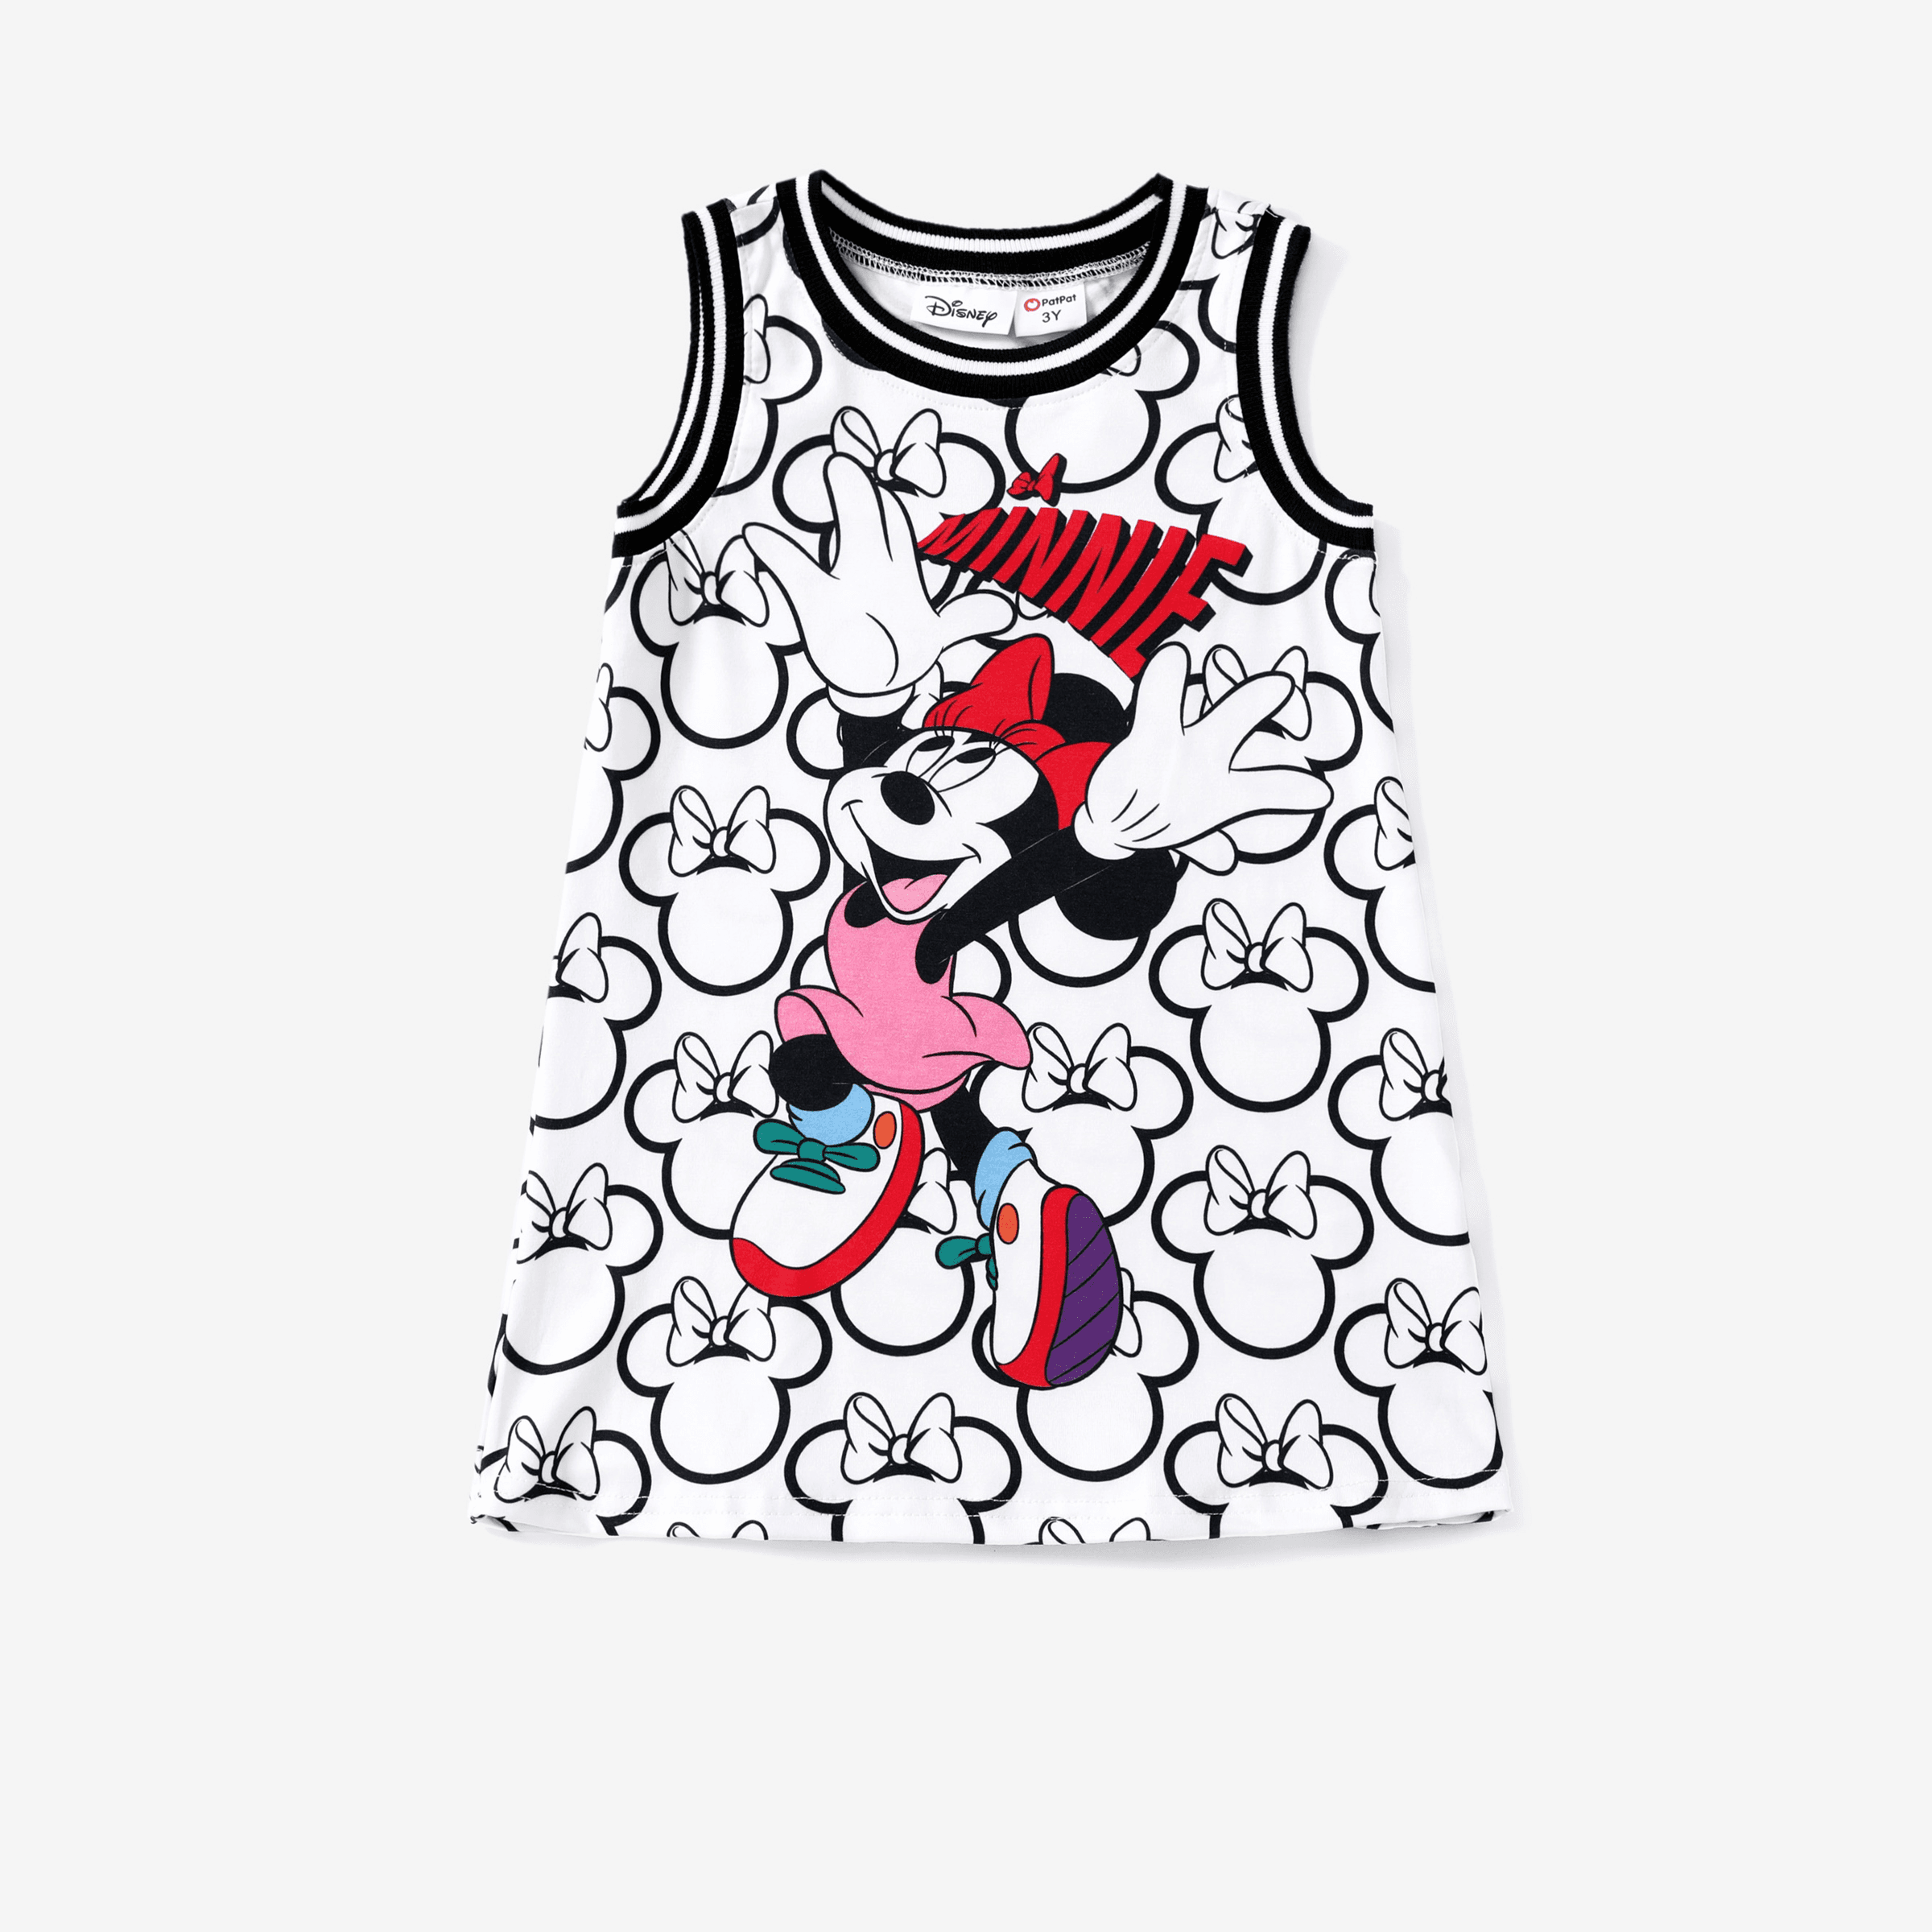 

Disney Mickey and Friends Toddler Girls 1pc Naia™ Character Print Sleeveless Sporty Dress